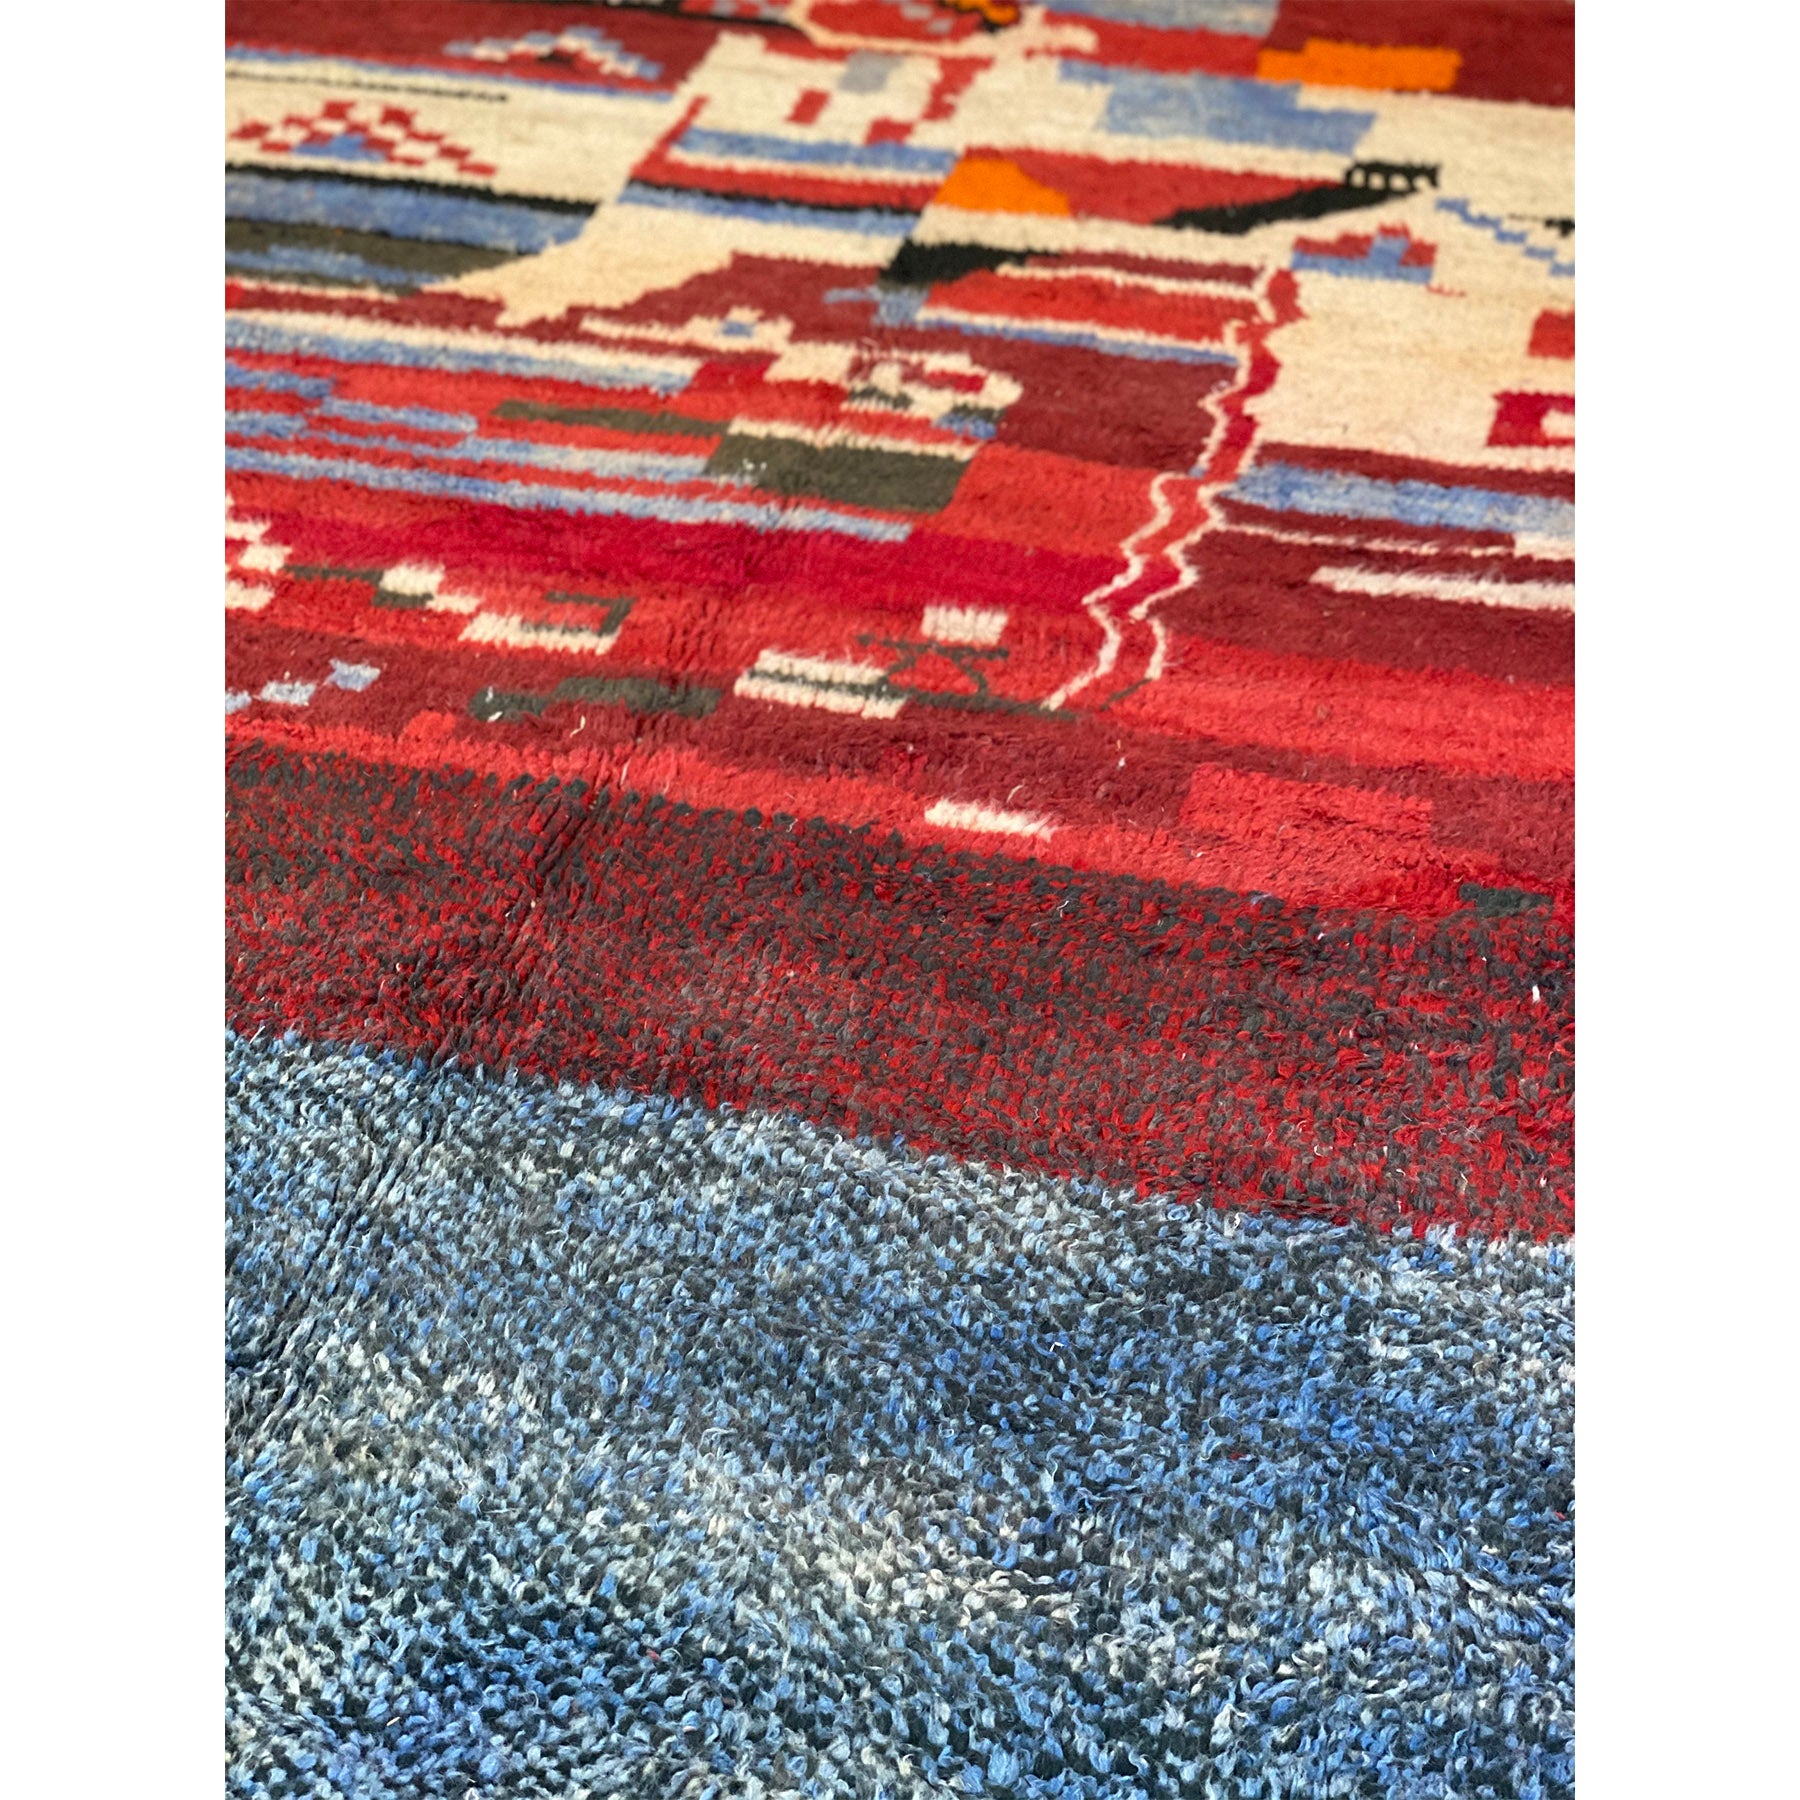 Red and blue Moroccan berber carpet with art deco pattern - Kantara | Moroccan Rugs